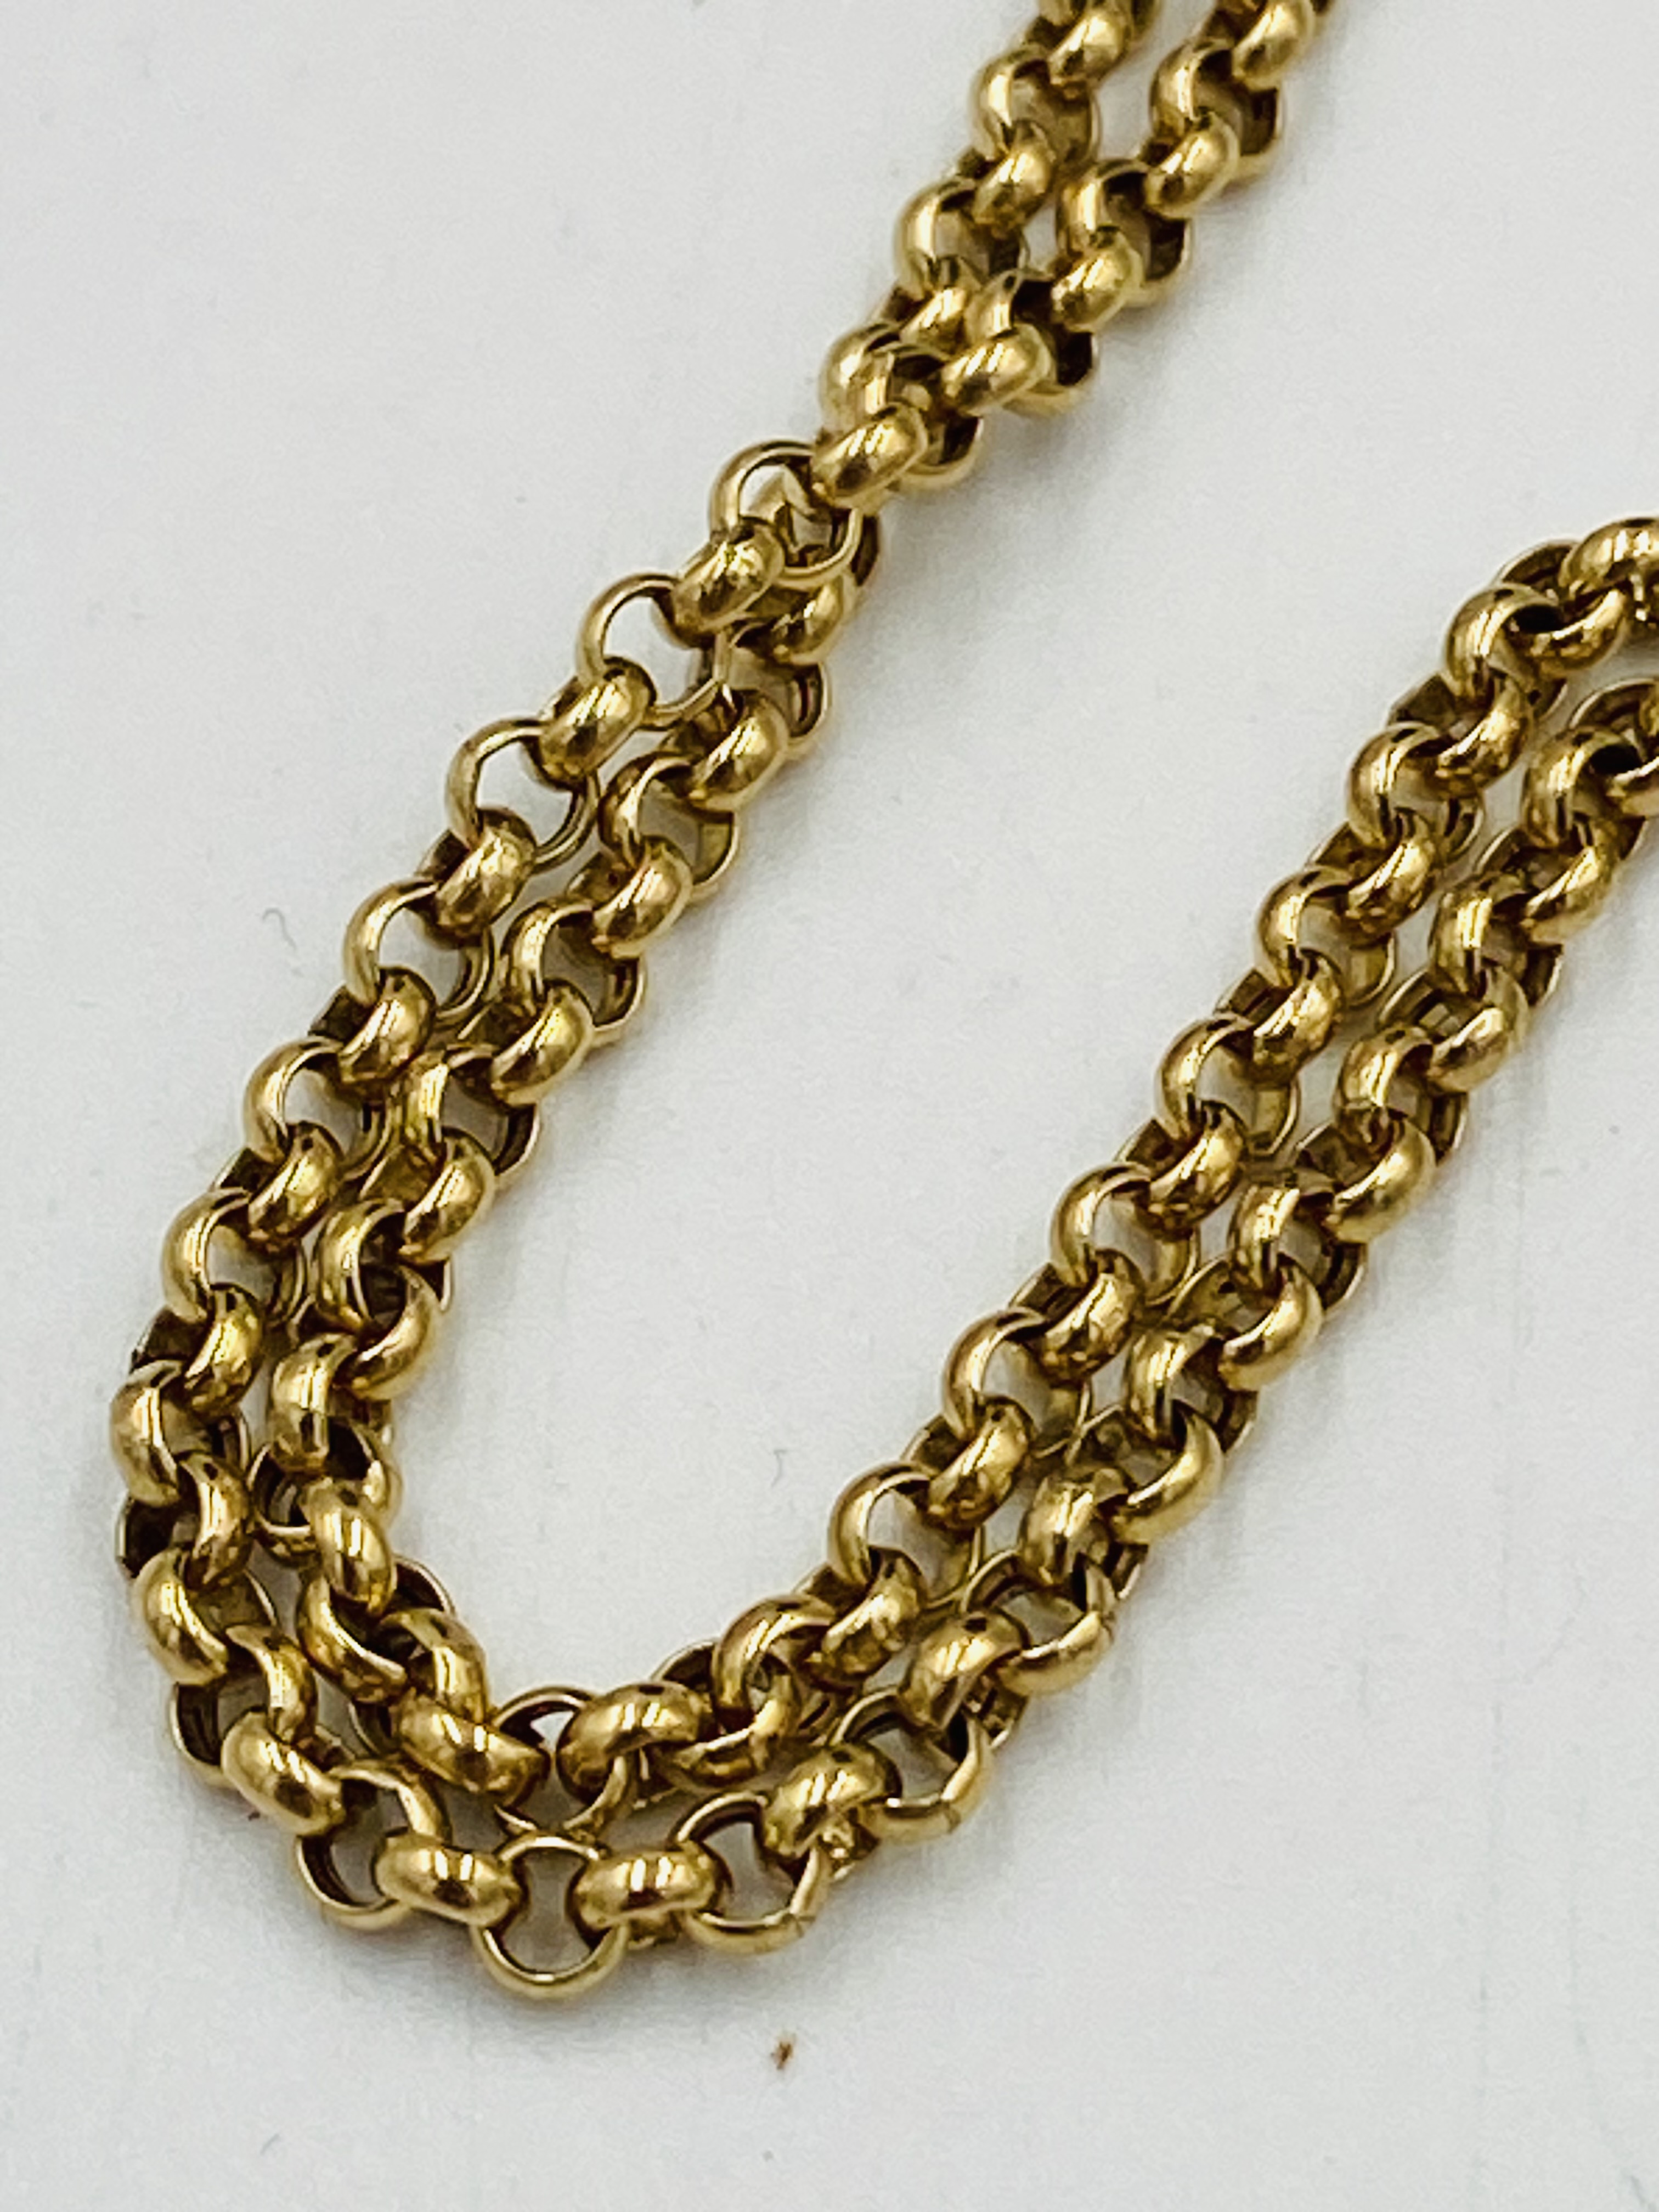 9ct gold chain with yellow metal and green stone pendant - Image 4 of 5